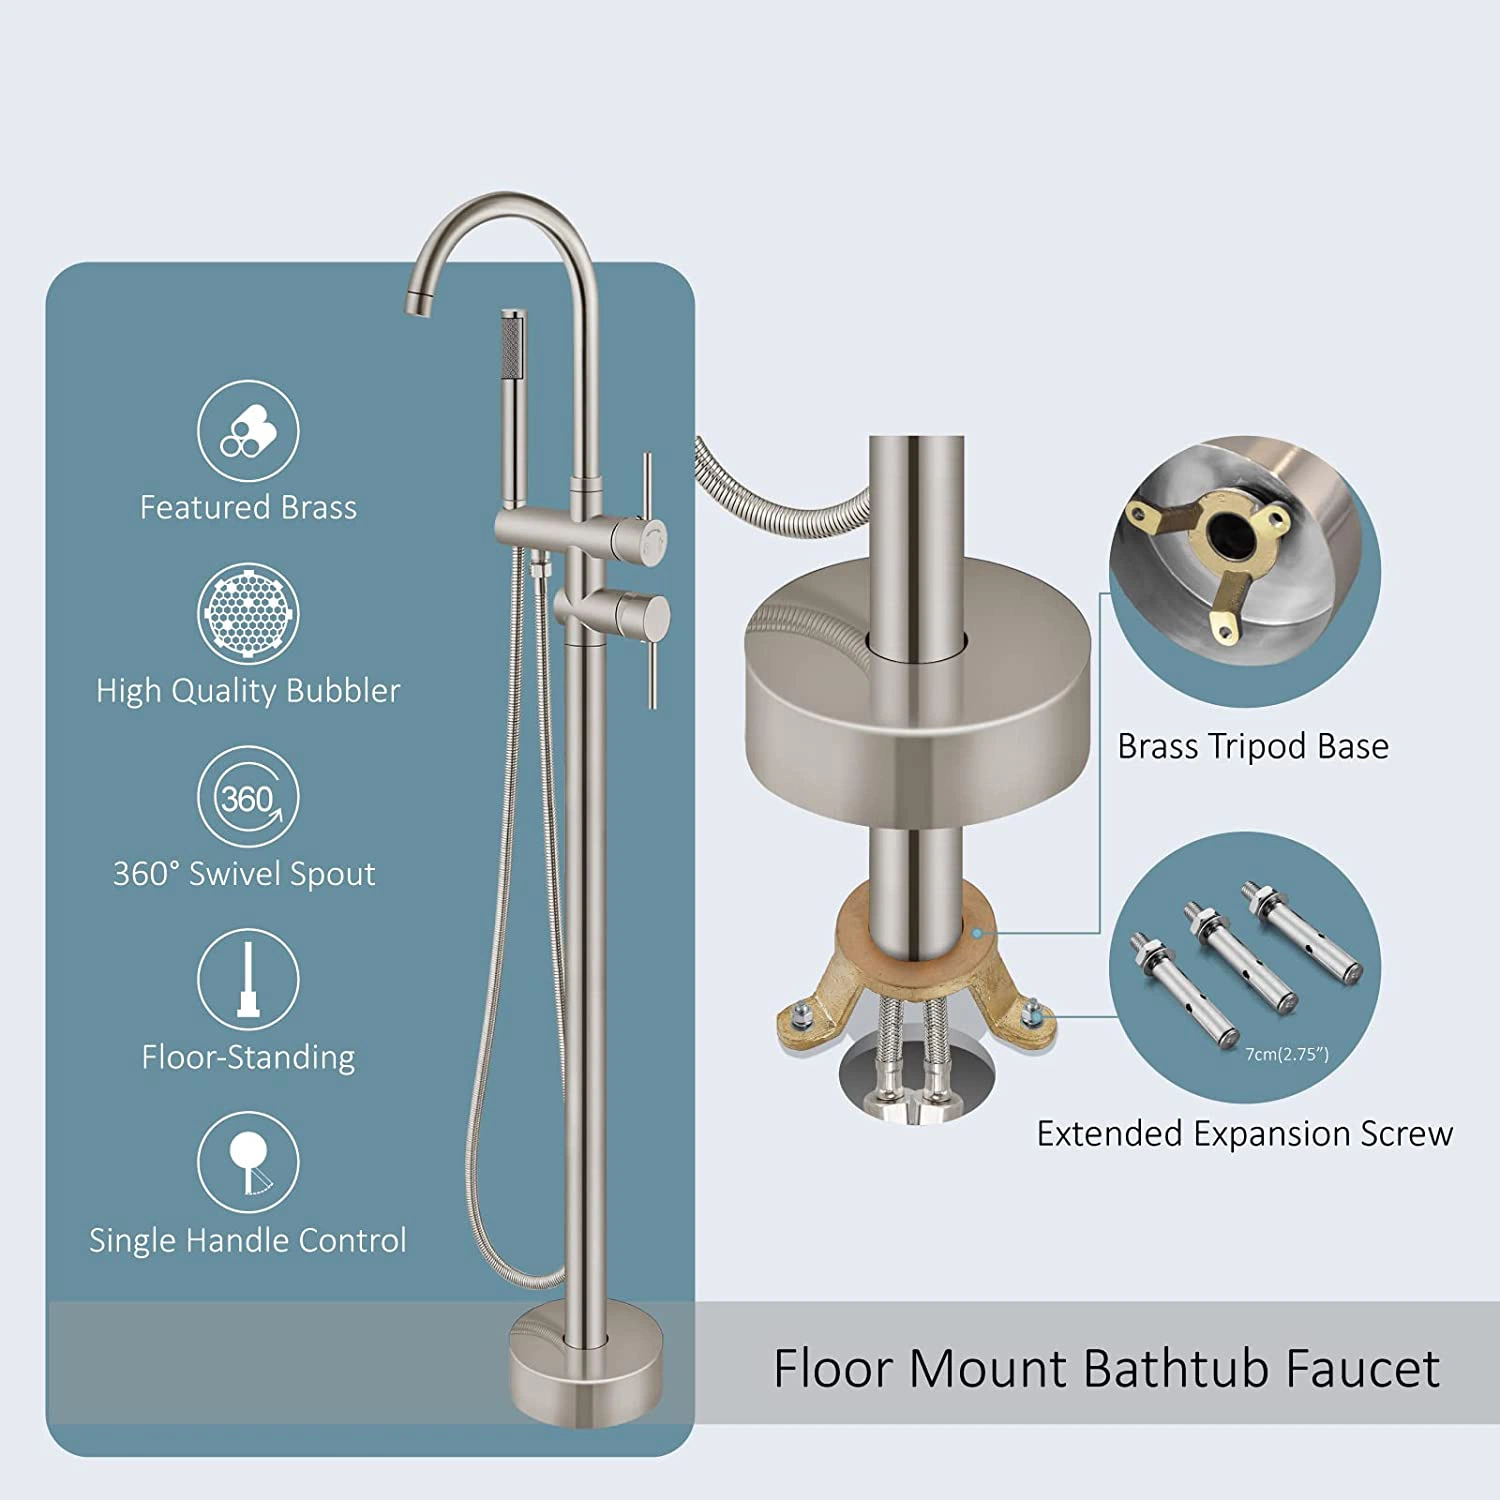 Floor Mount Bathtub Faucet Freestanding Tub Filler Brushed Nickel Standing High Flow Shower Faucets with Handheld Shower Mixer Taps Swivel Spout